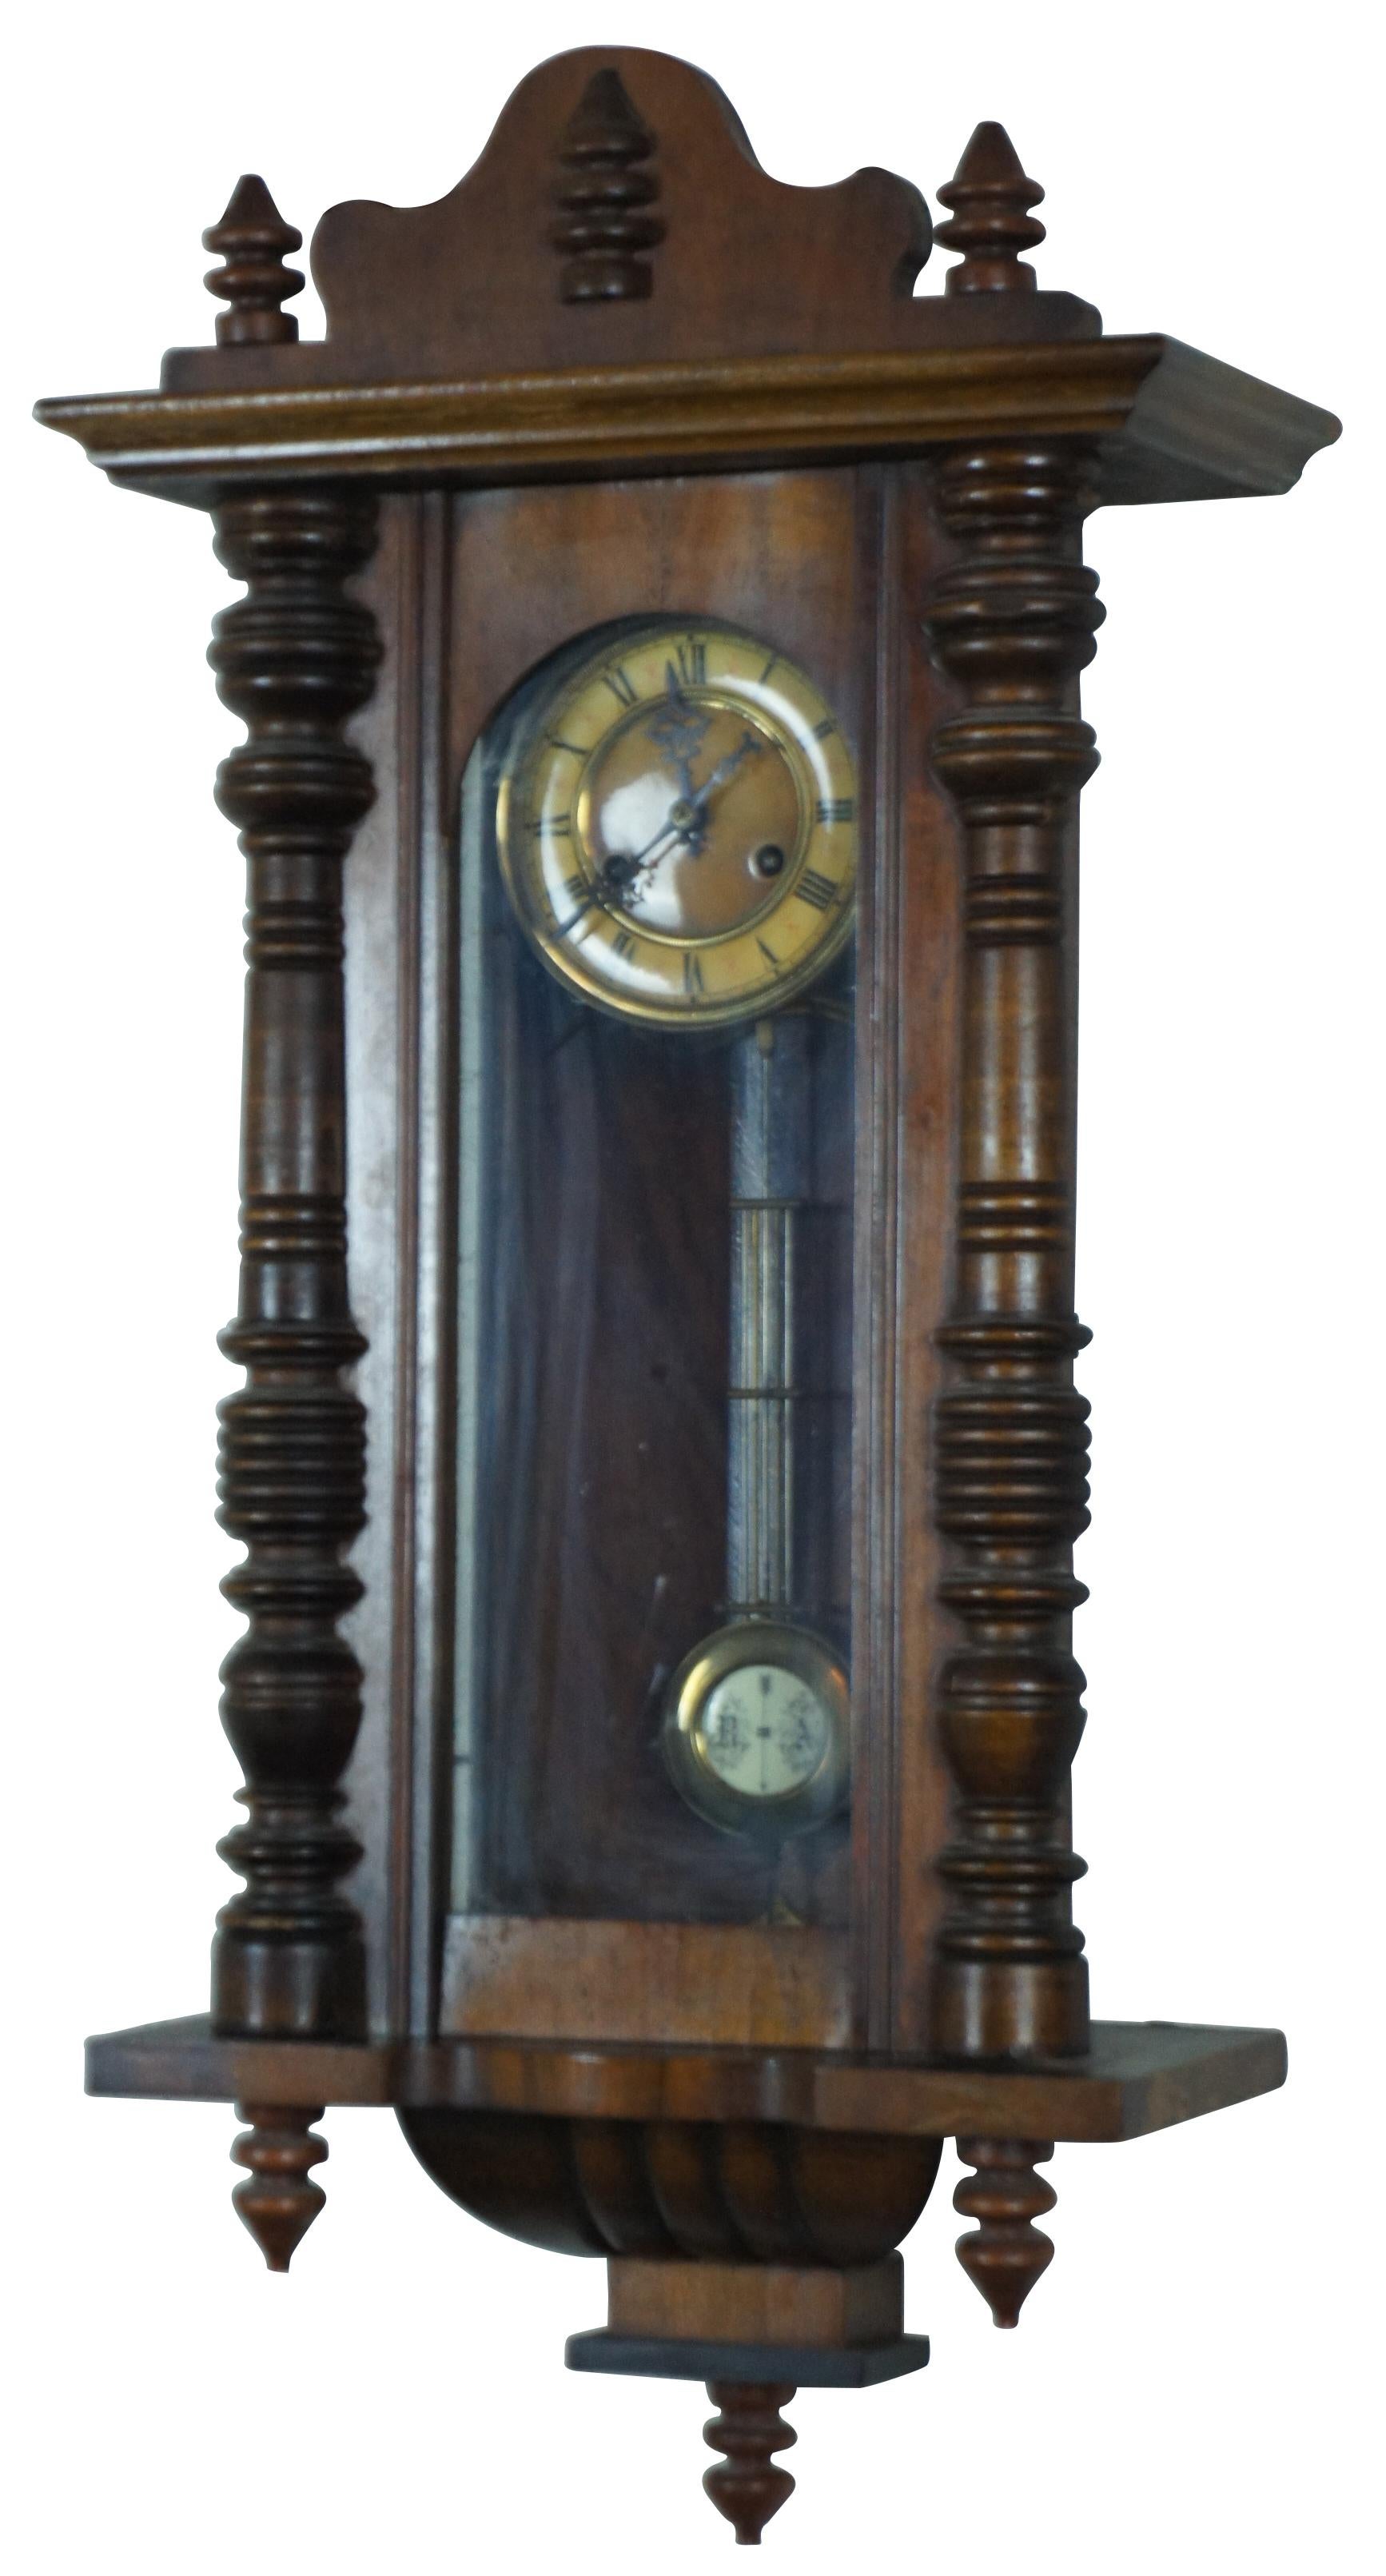 Antique early 20th century wall clock with carved wood case with glass on three sides, R-A pendulum, and Kienzle movement.
Measure: 33